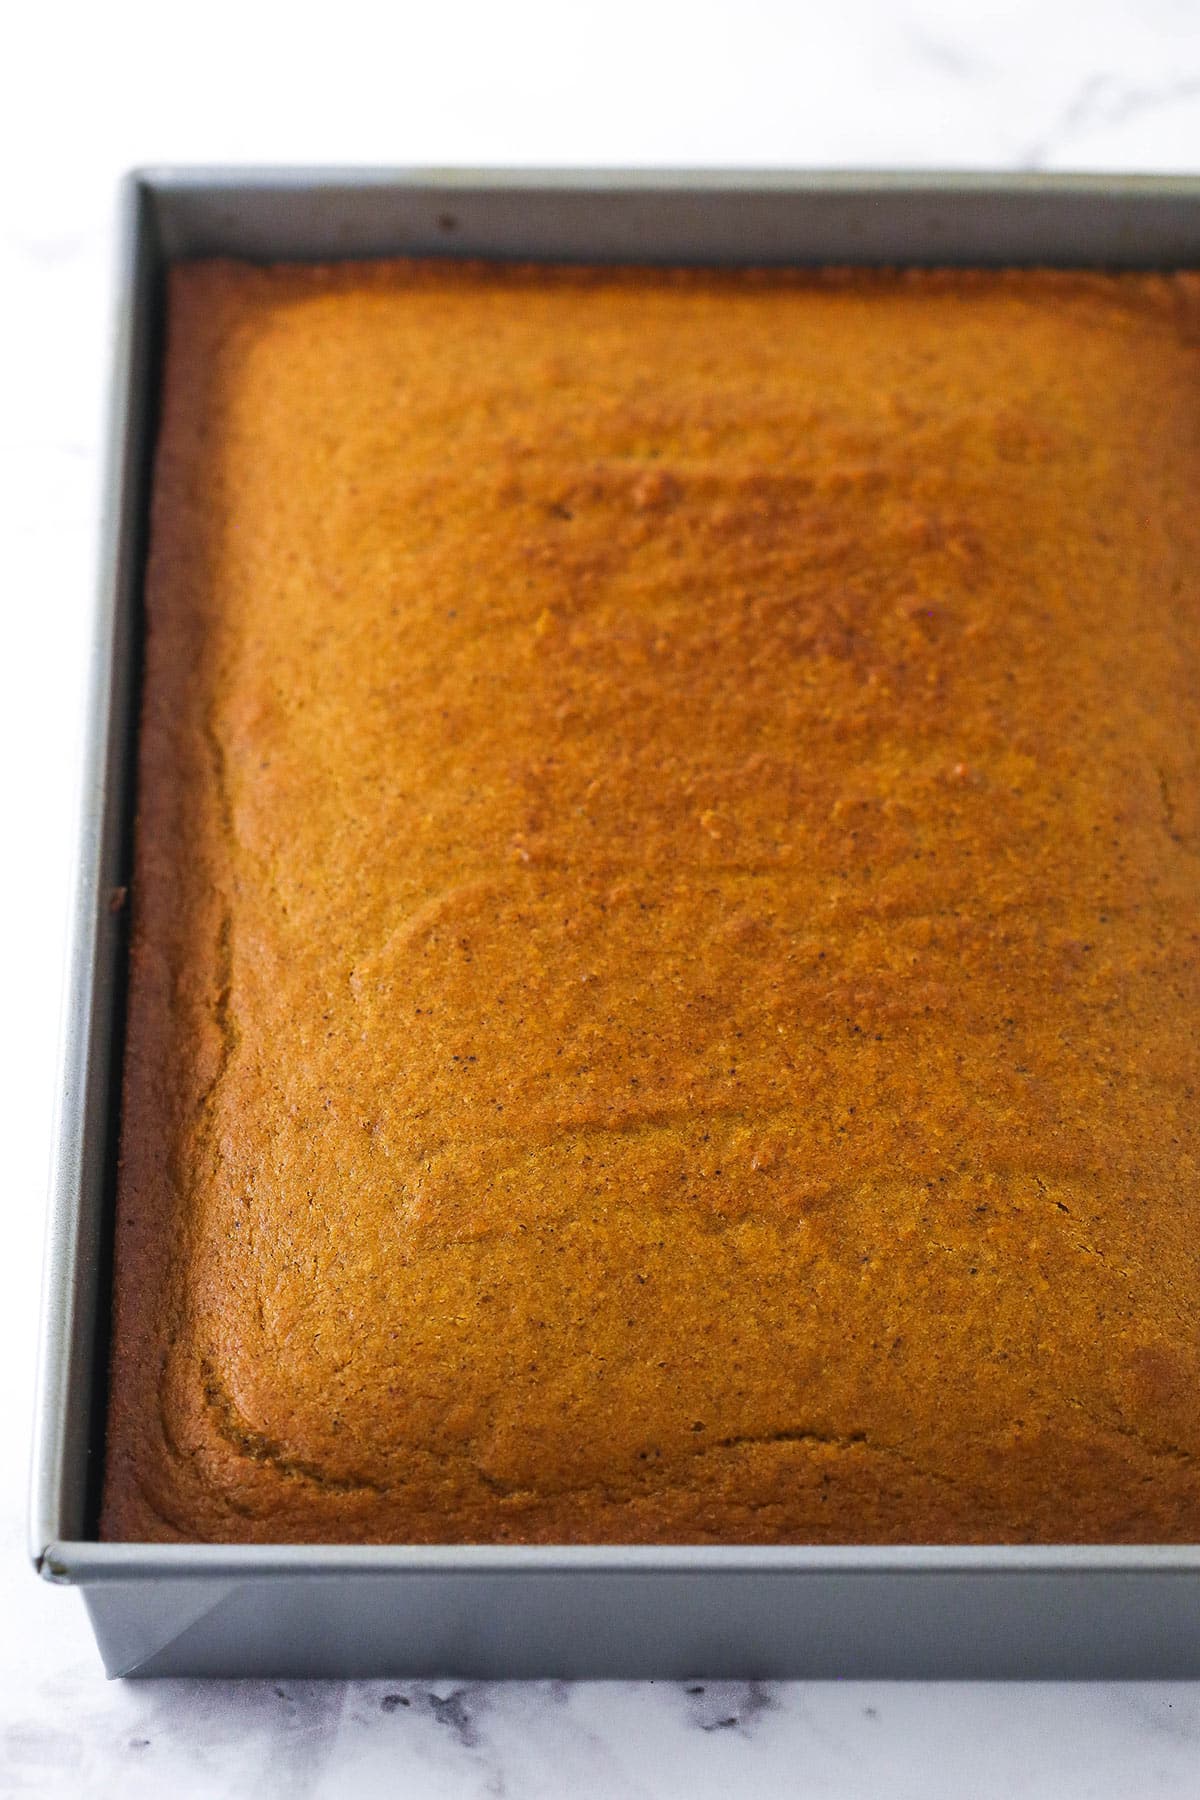 The cooled cake in a rectangular 9x13-inch pan on a marble surface